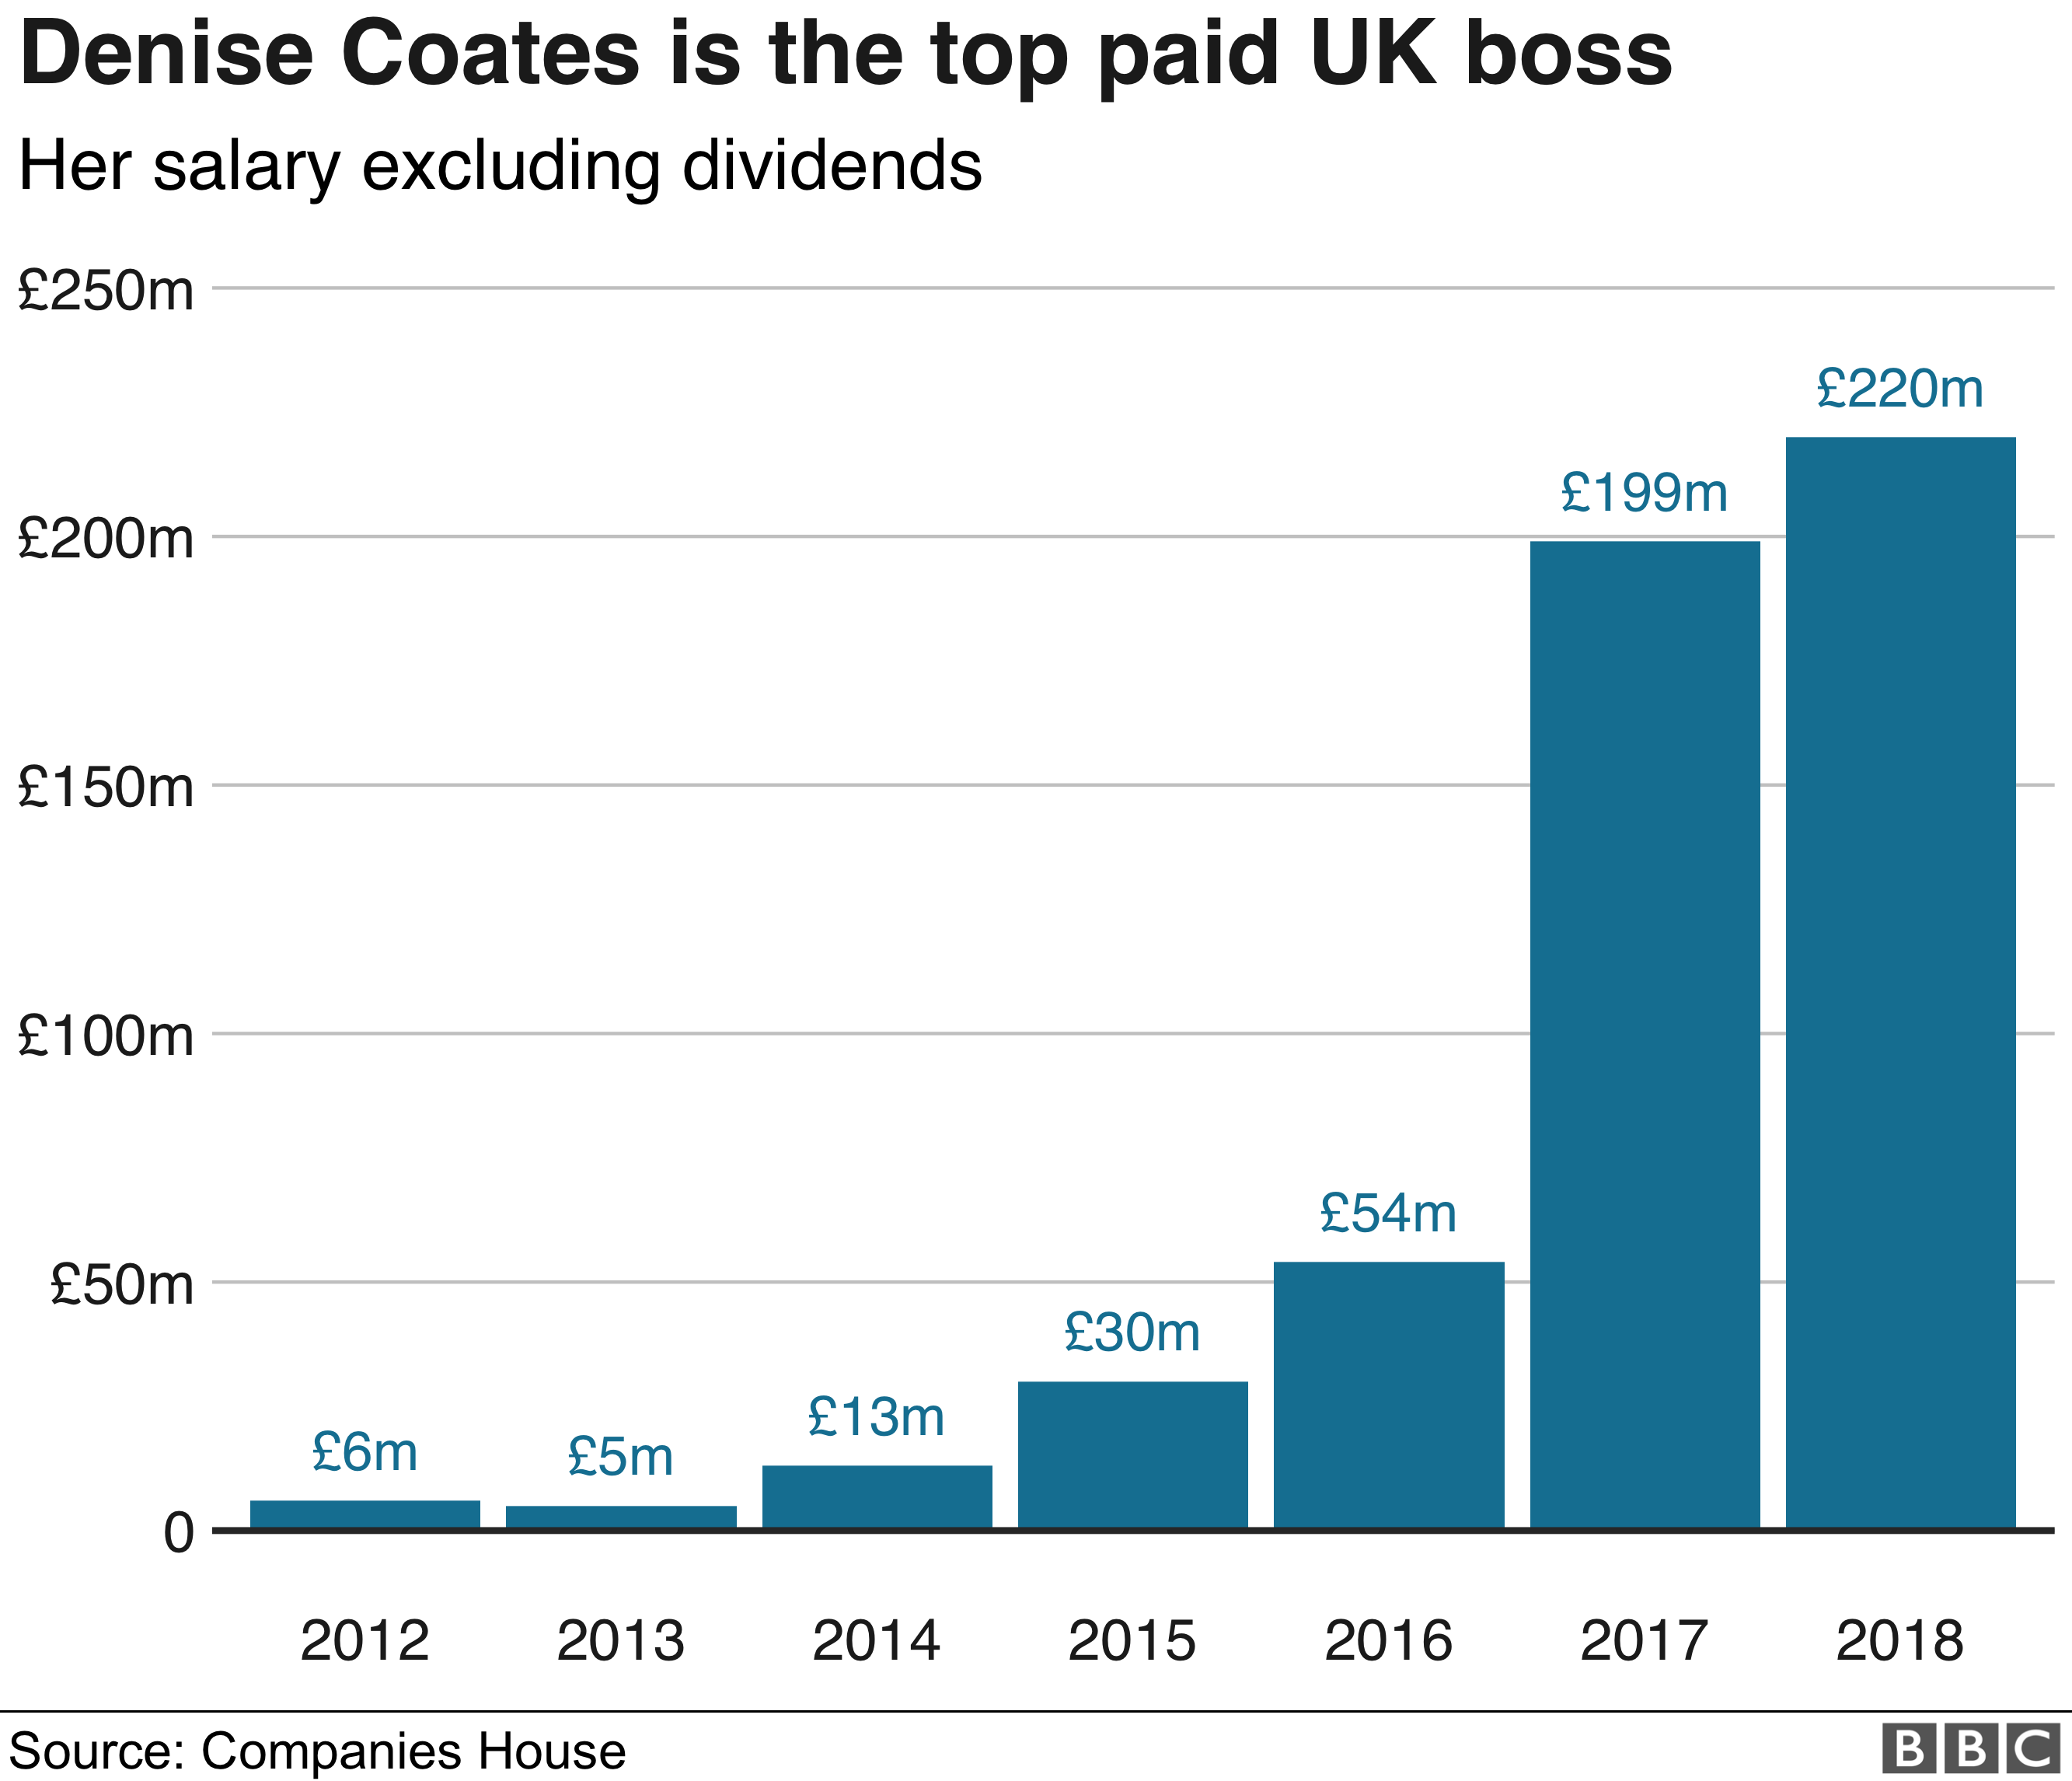 Graph showing Denise Coates pay over years